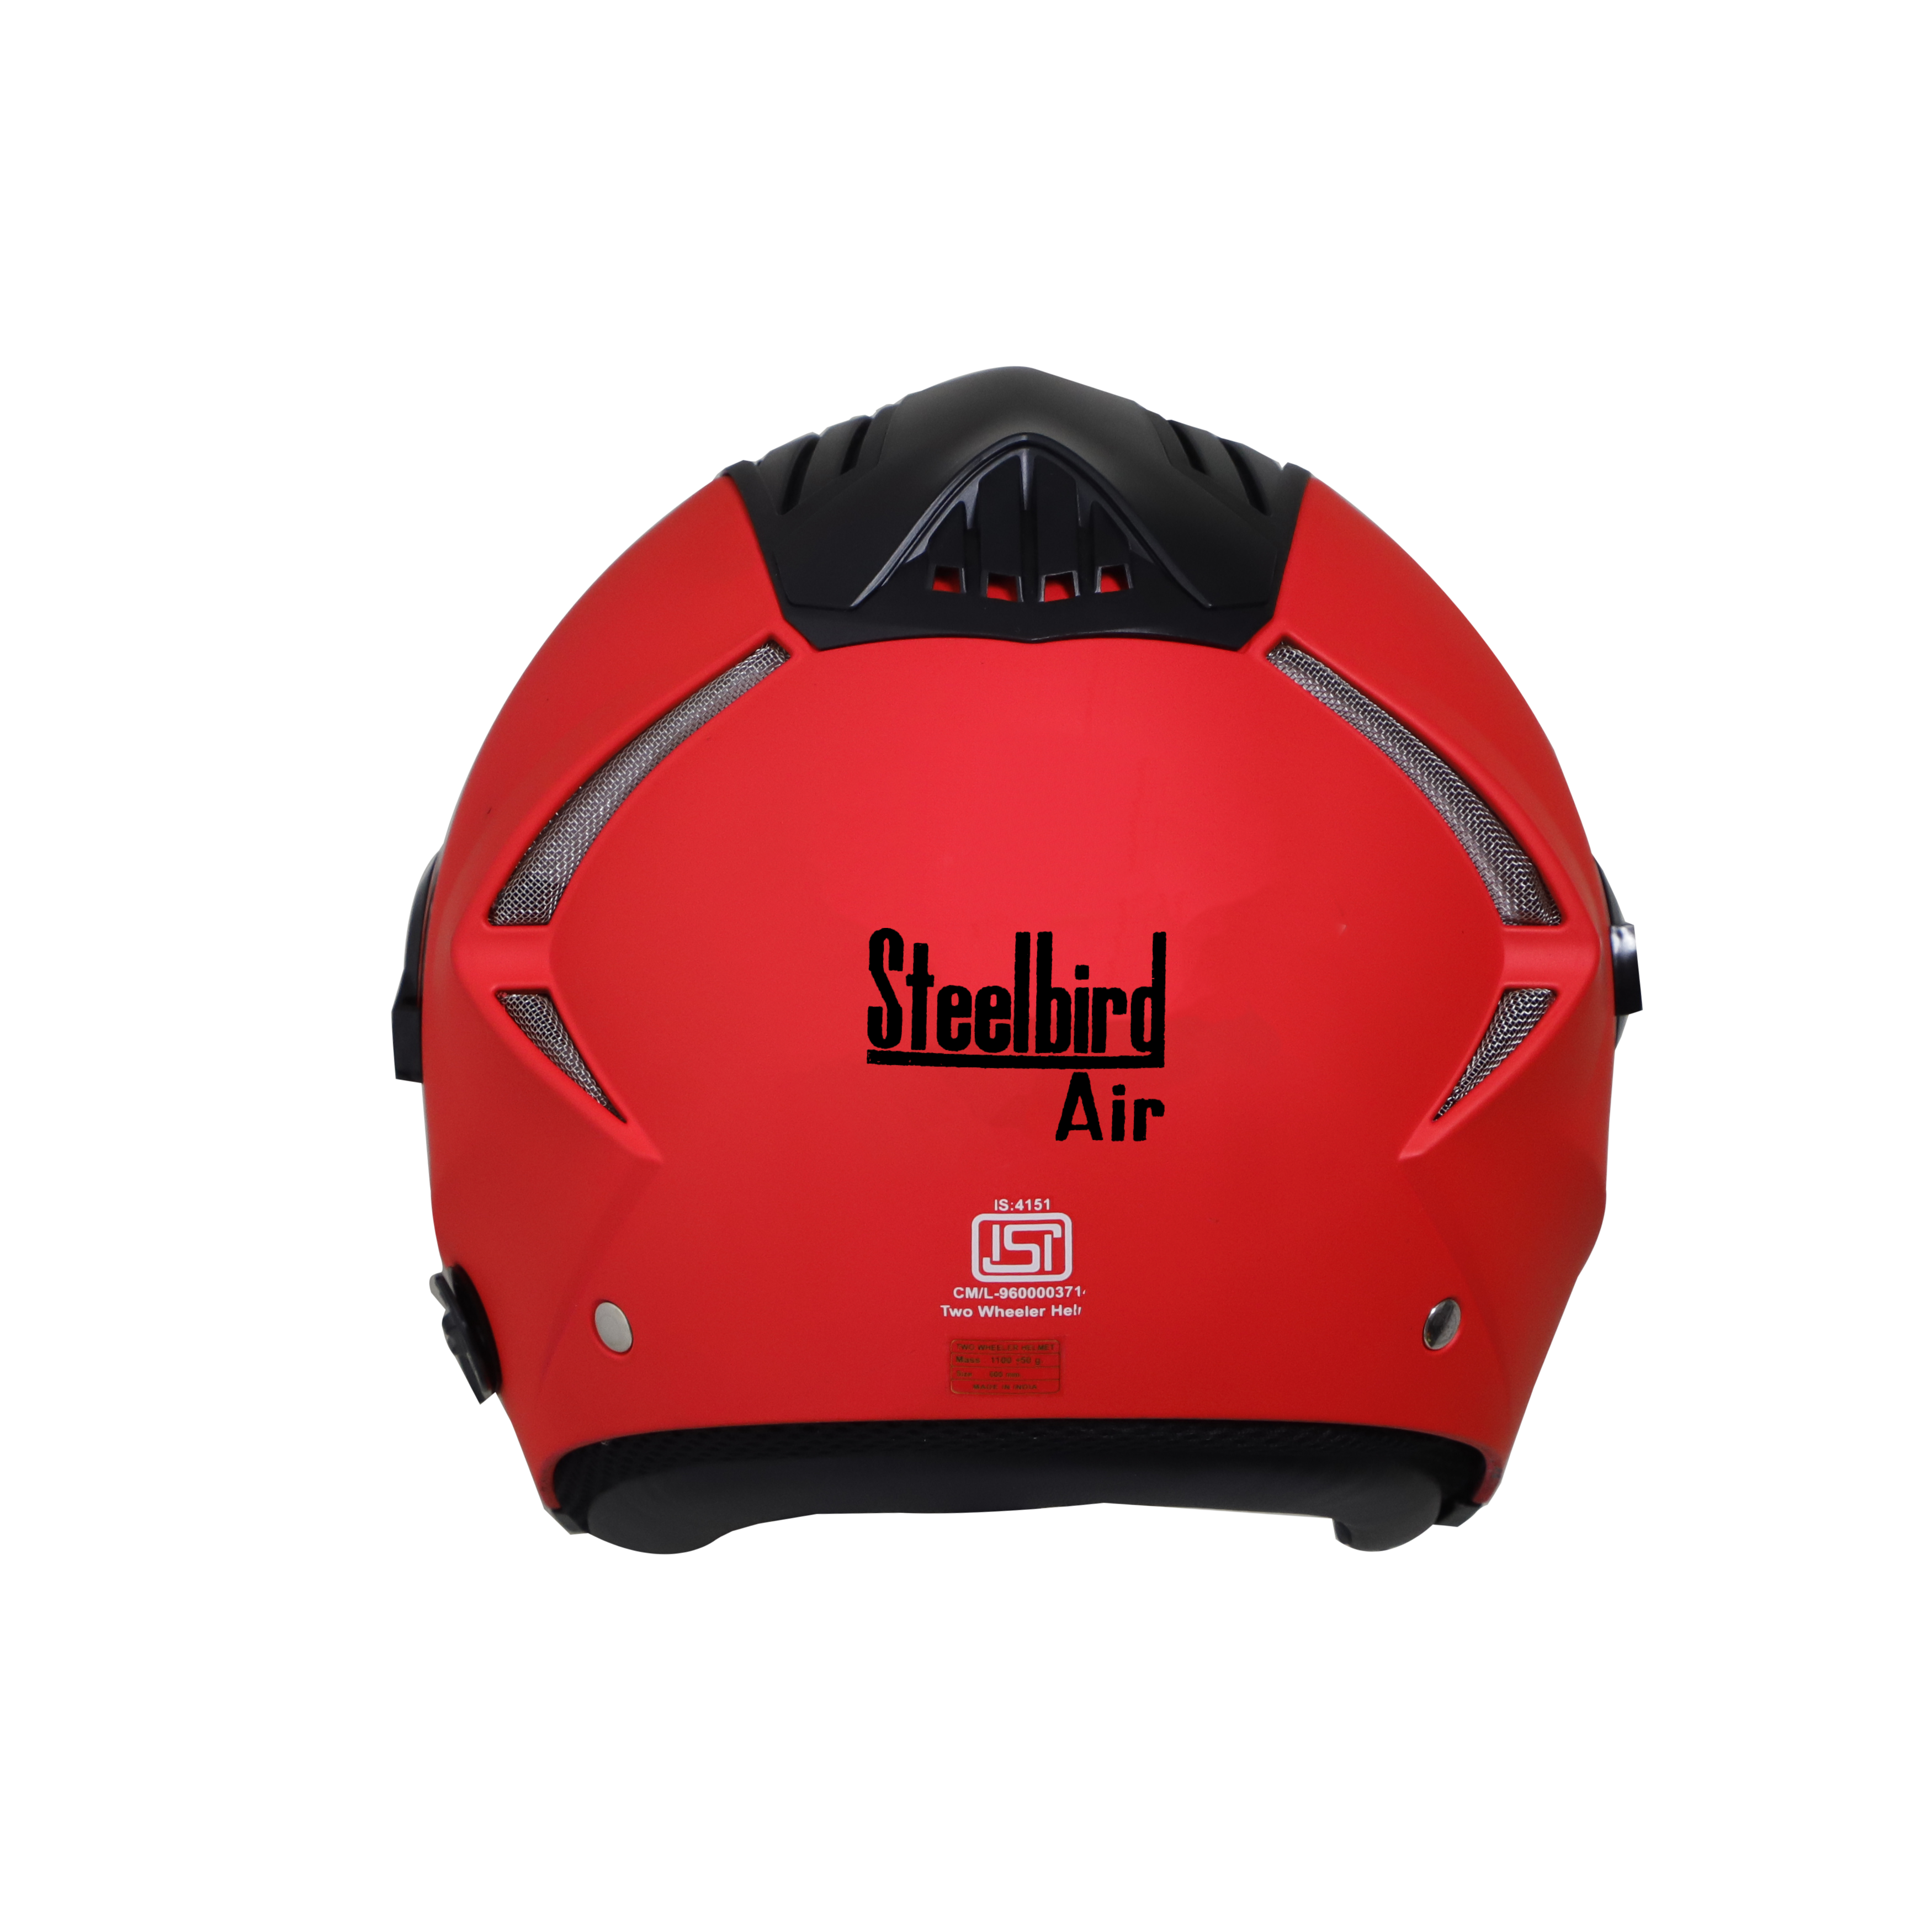 SBA-3 MAT GLOSSY FLUO RED WITH CHROME SILVER INNER SUN SHIELD